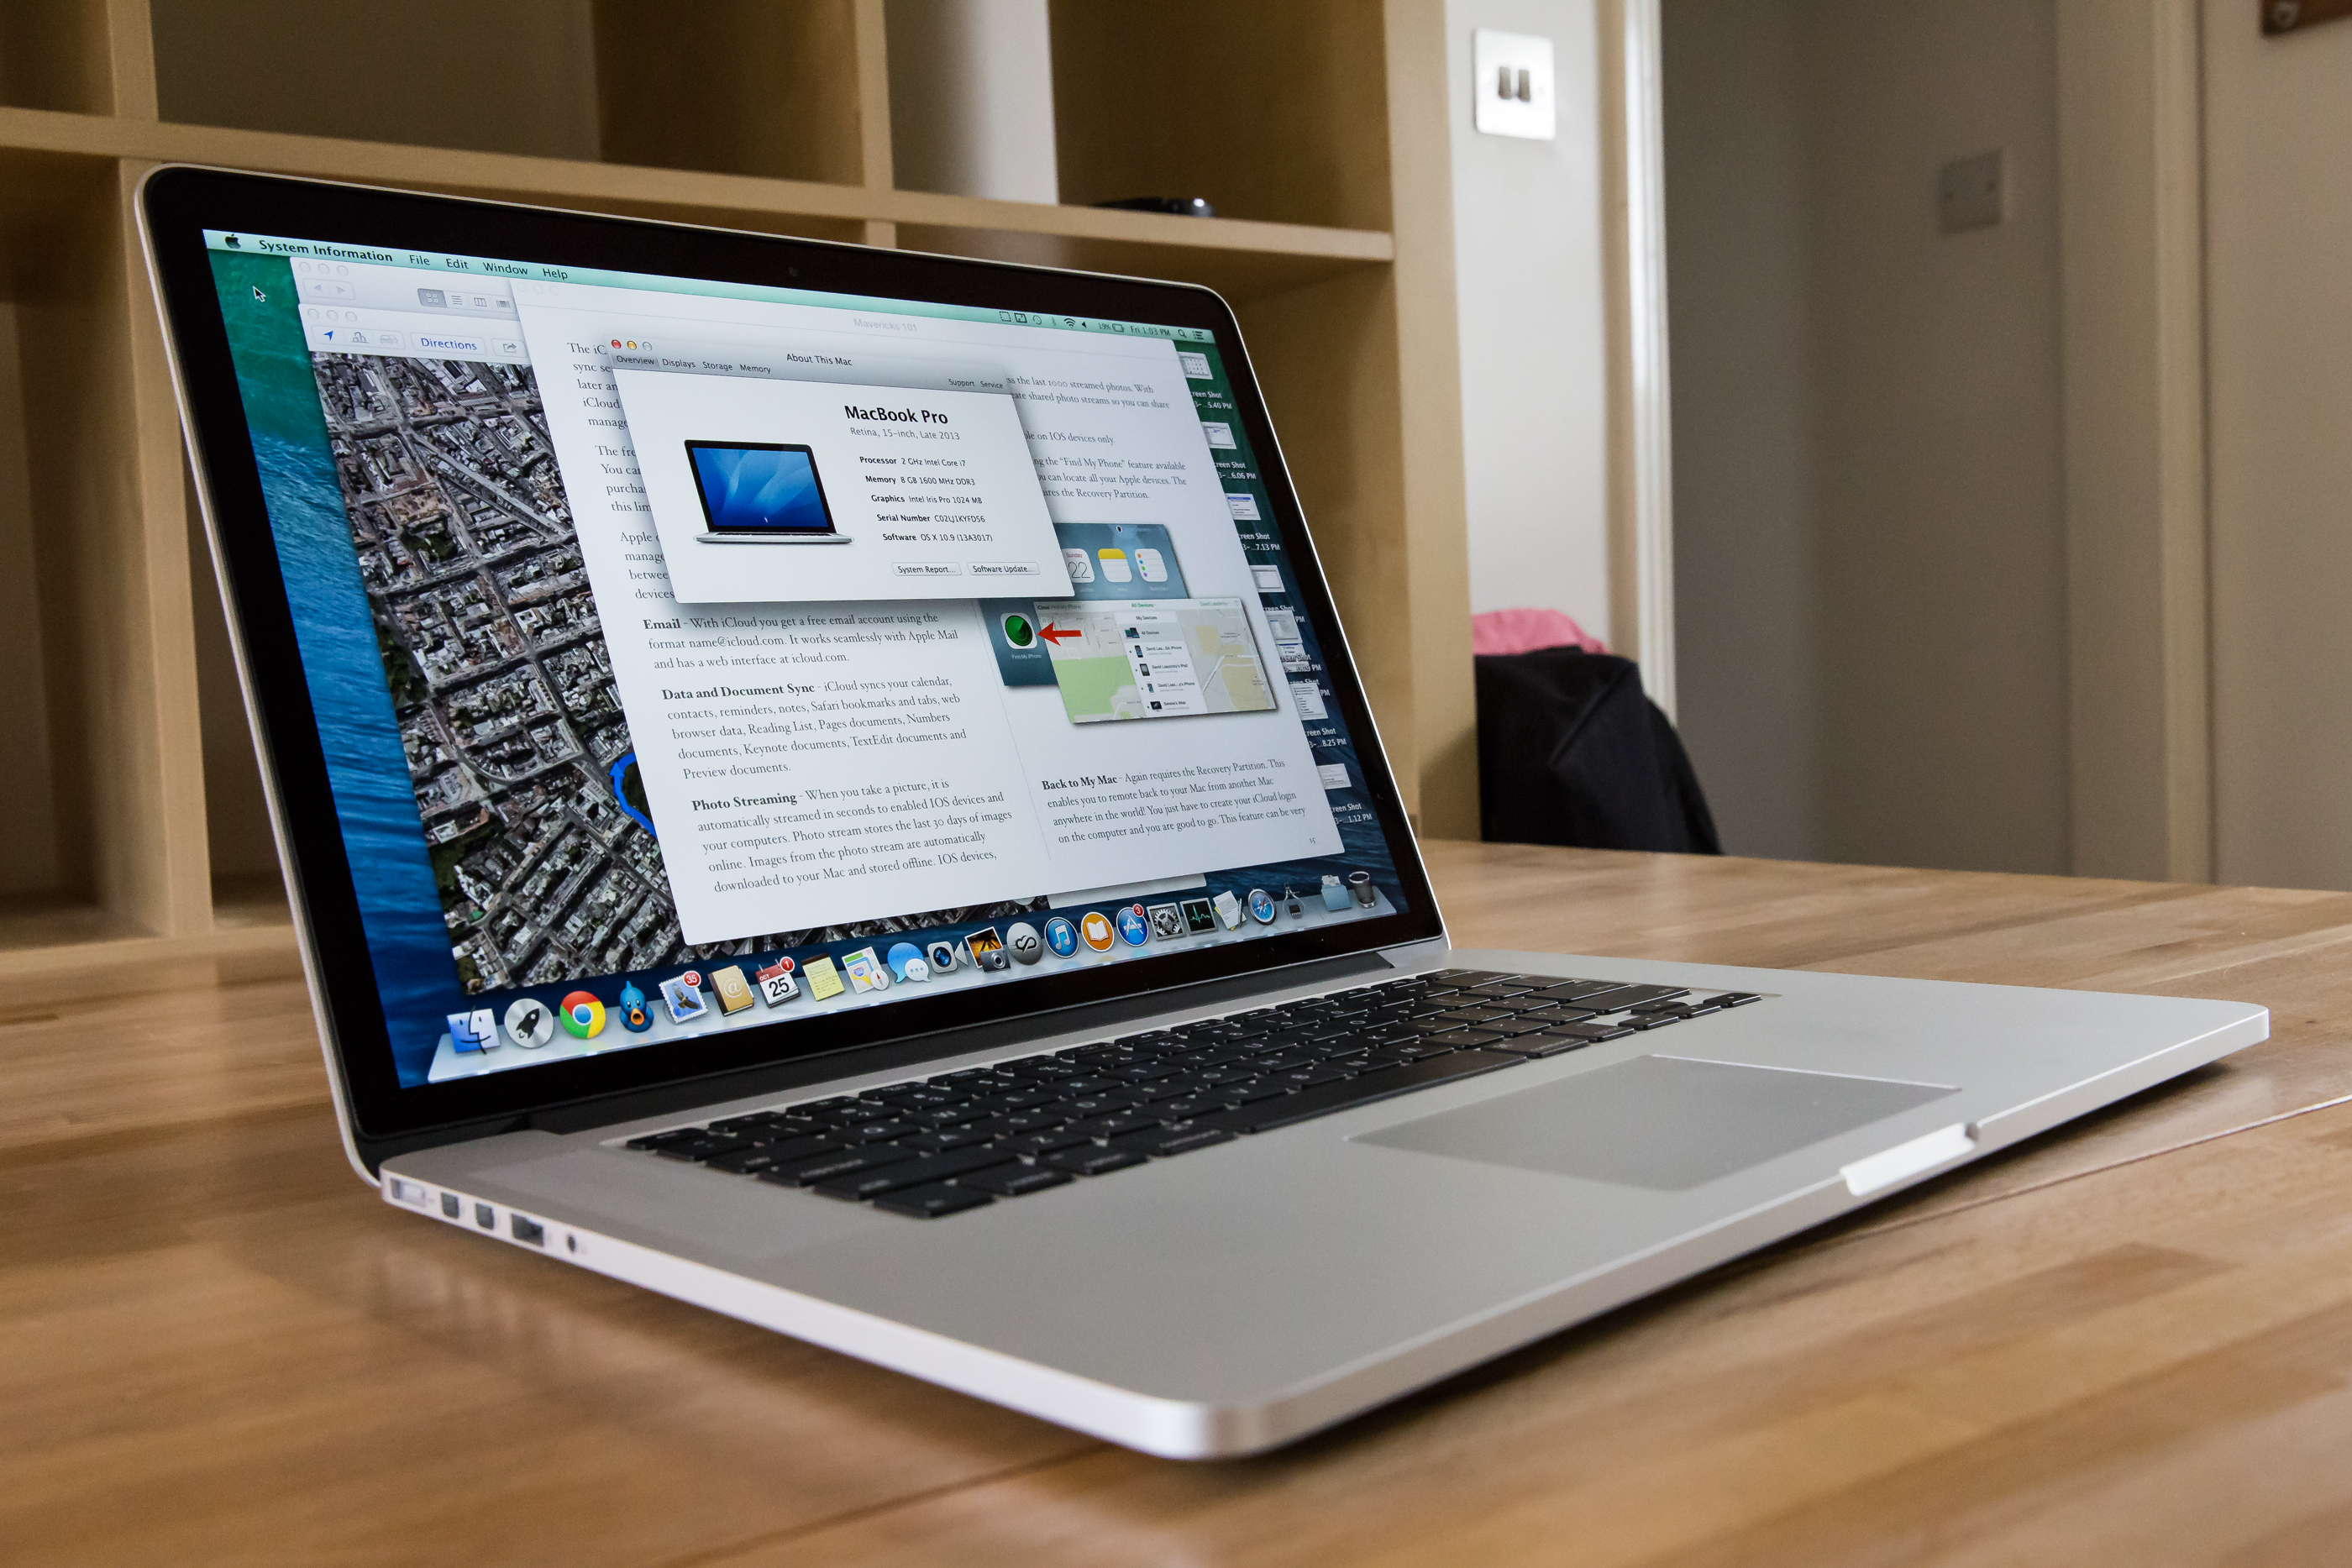 apple macbook pro 15 inch with retina display review